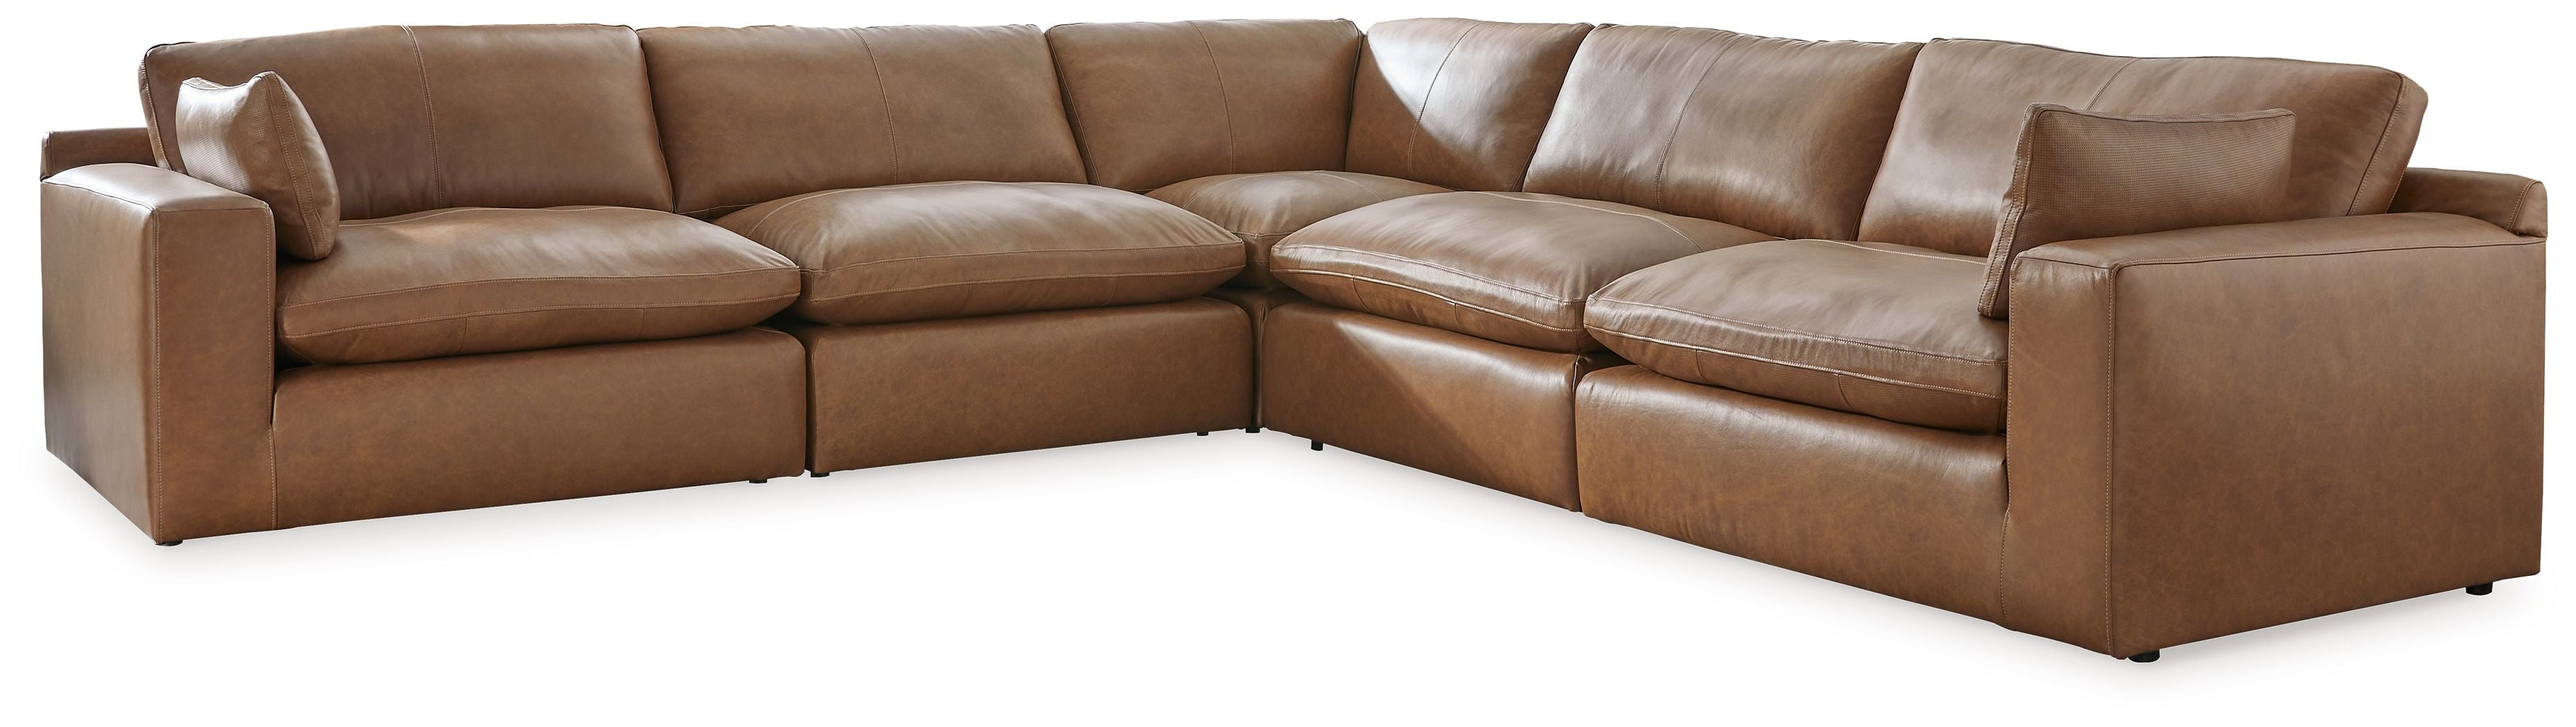 emilia-brown-leather-sectional